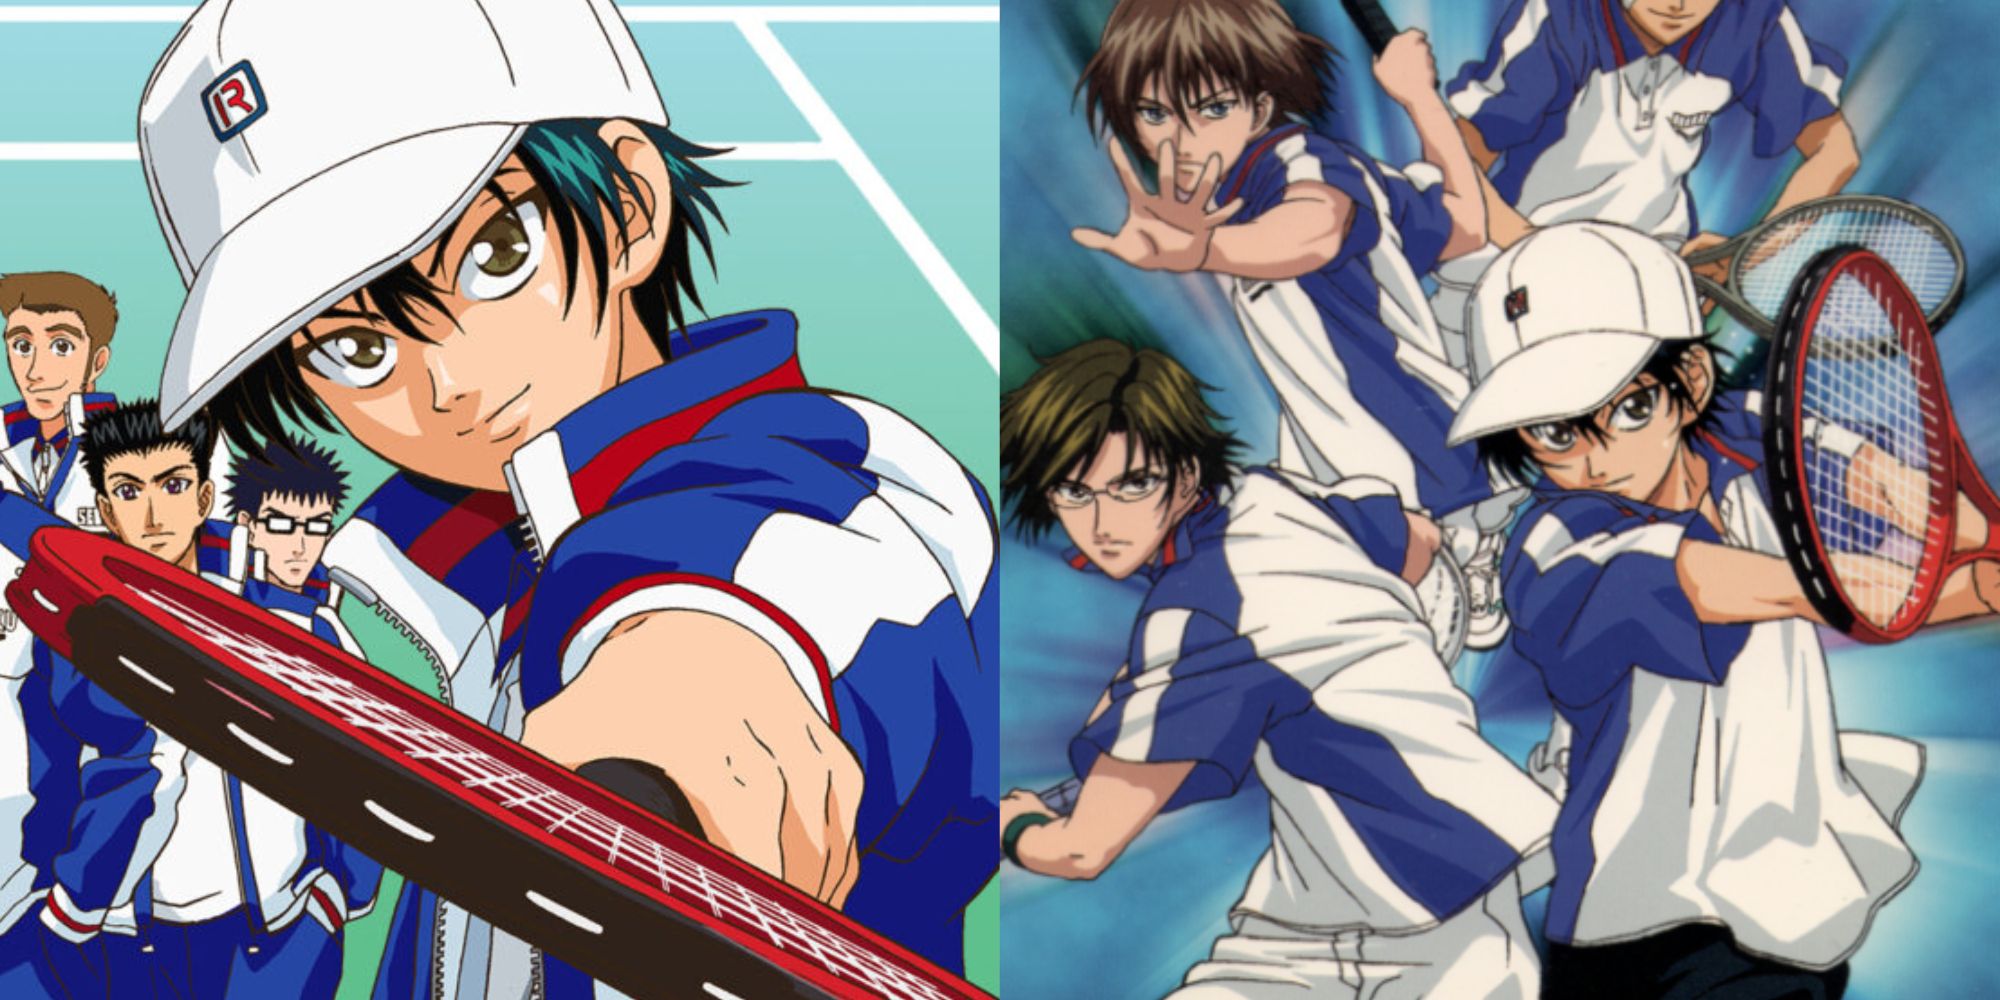 Main images of the Prince of Tennis anime with different cast members